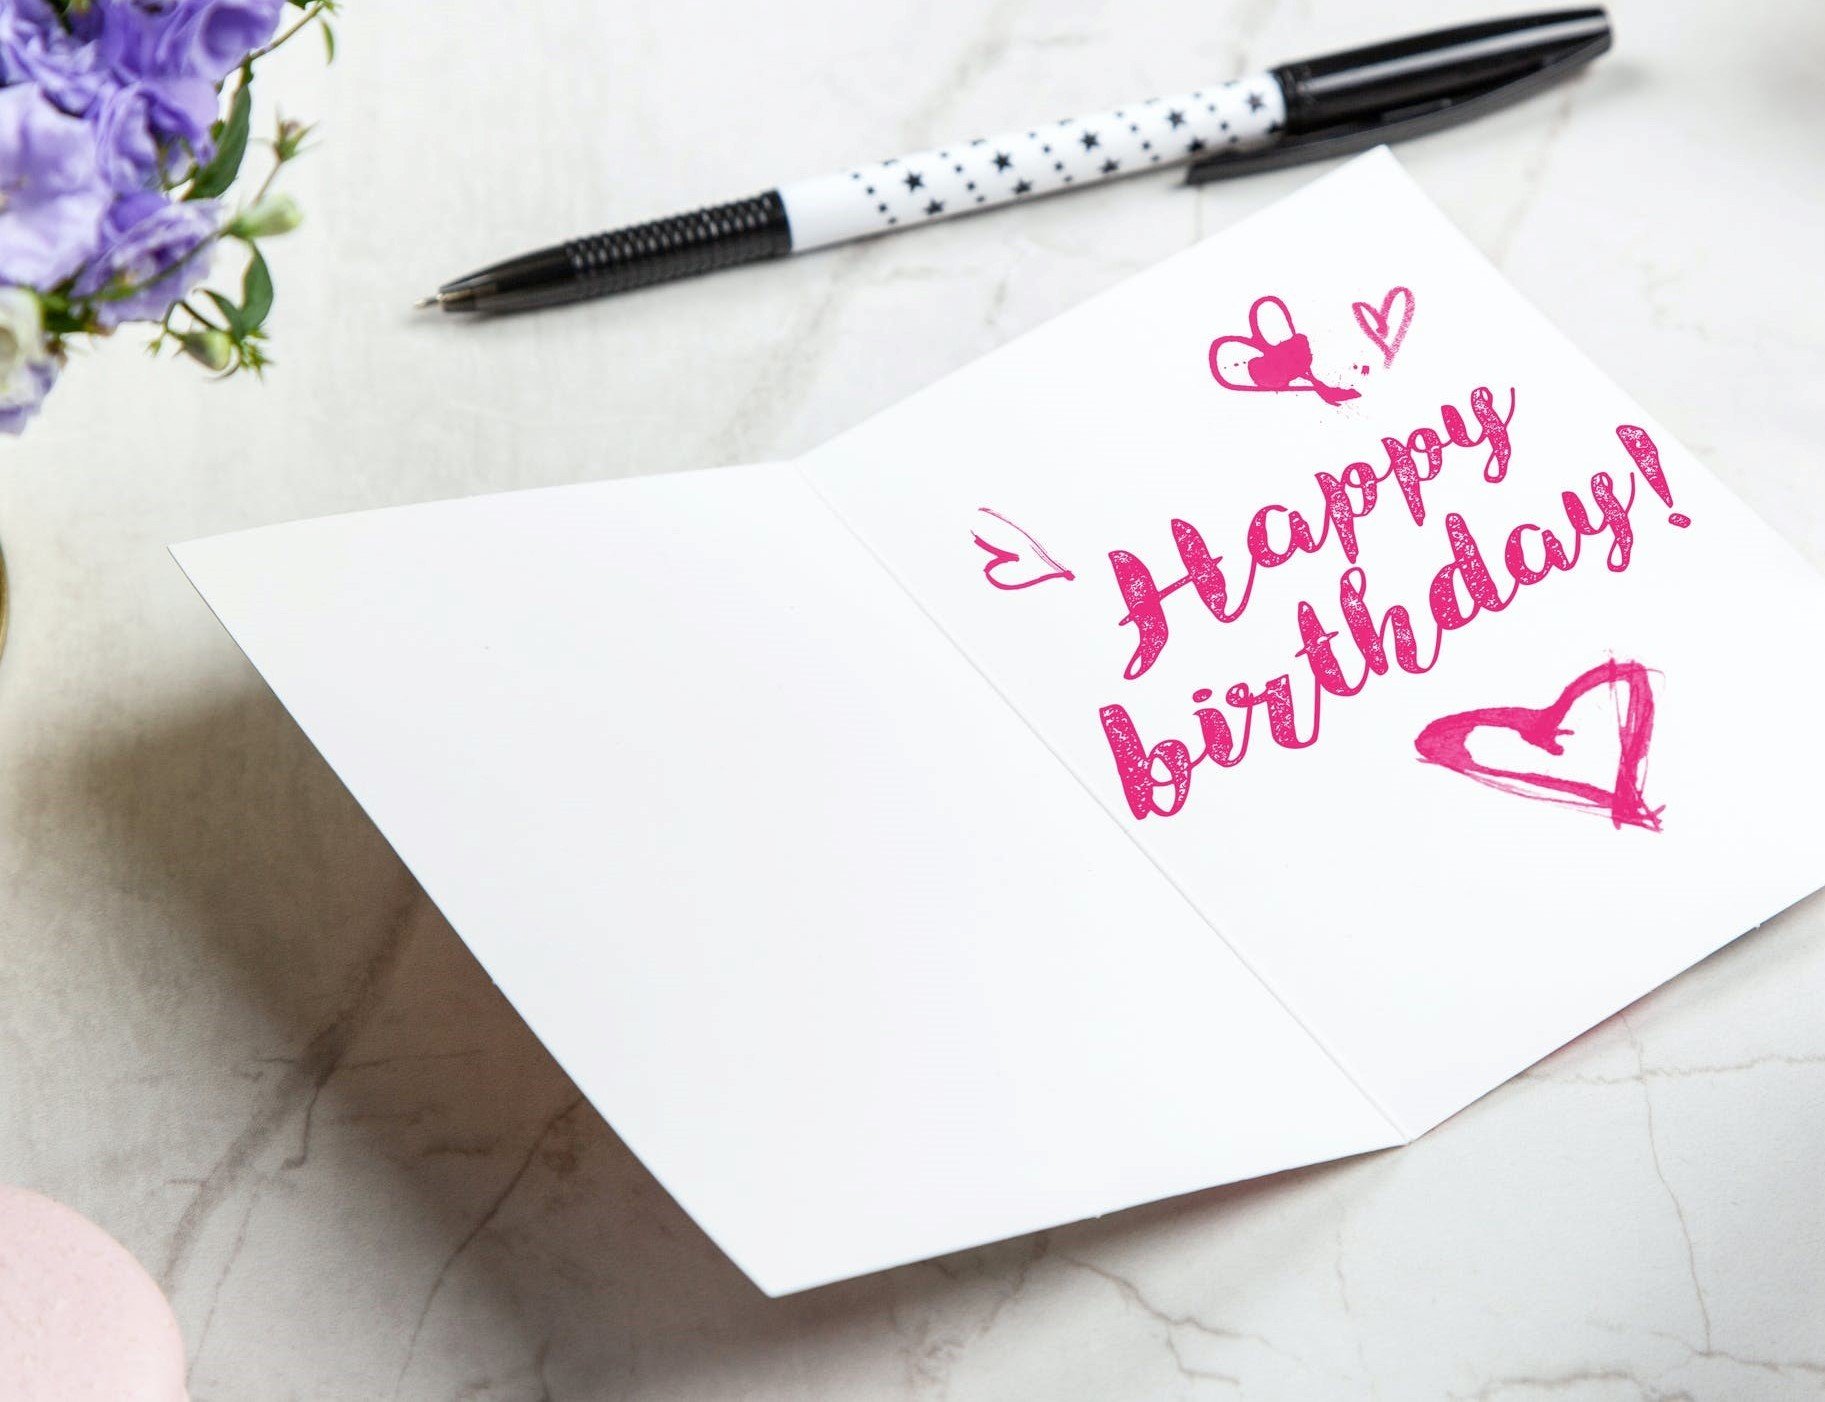 A birthday card to send to Heaven | Source: Pexels